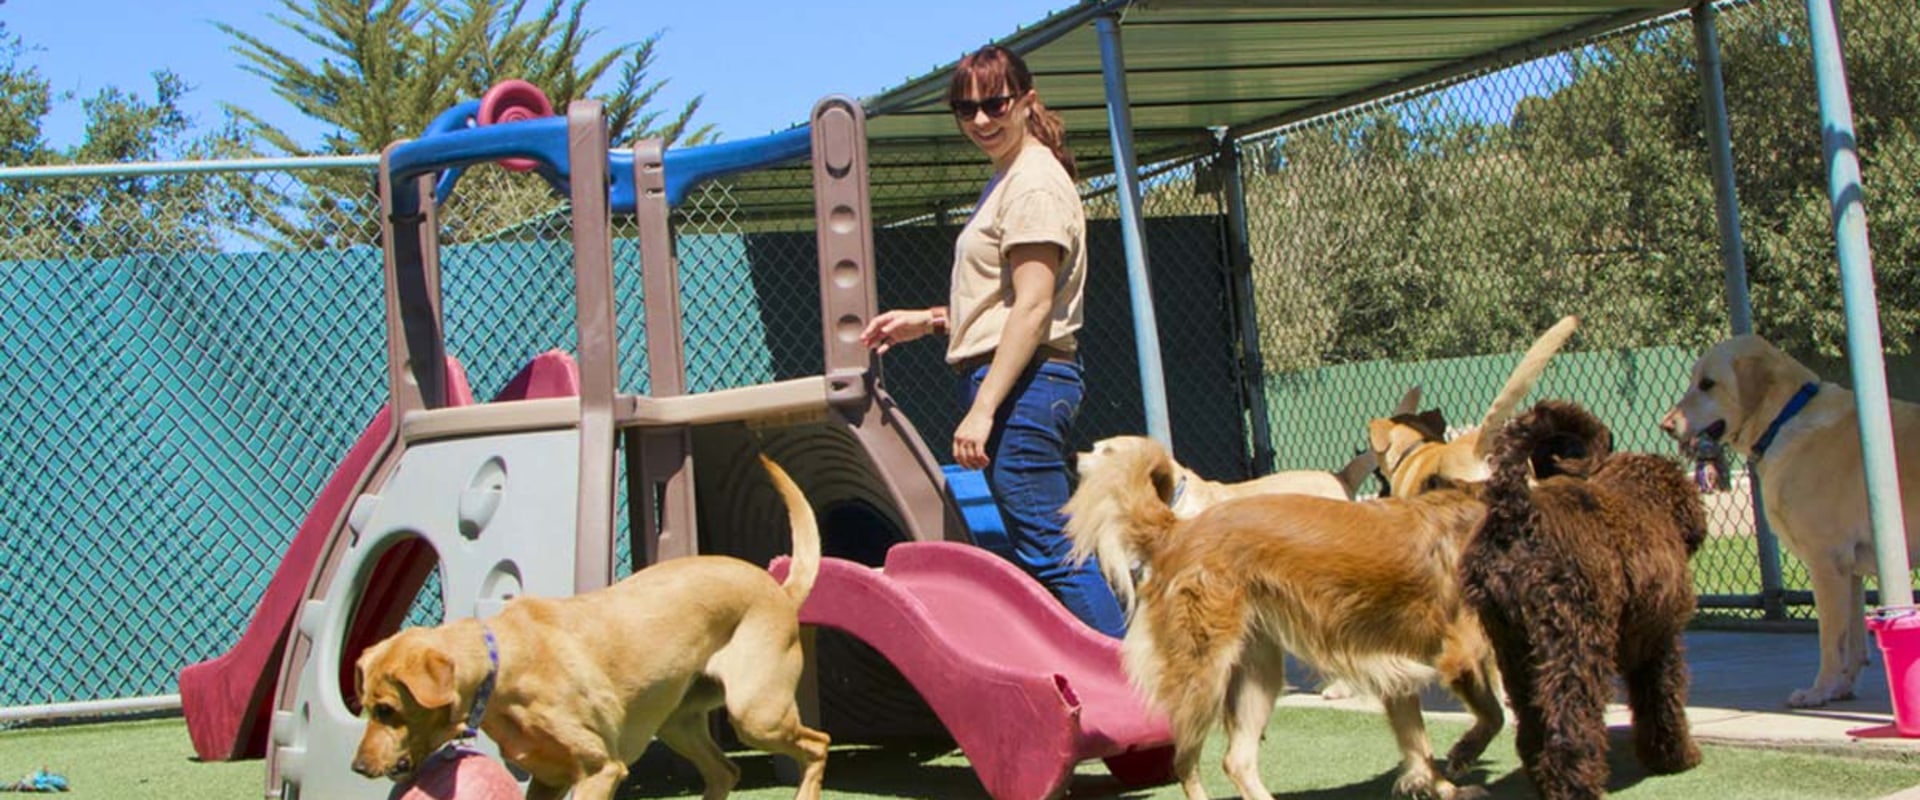 Are there any additional fees for training at a dog kennel service?